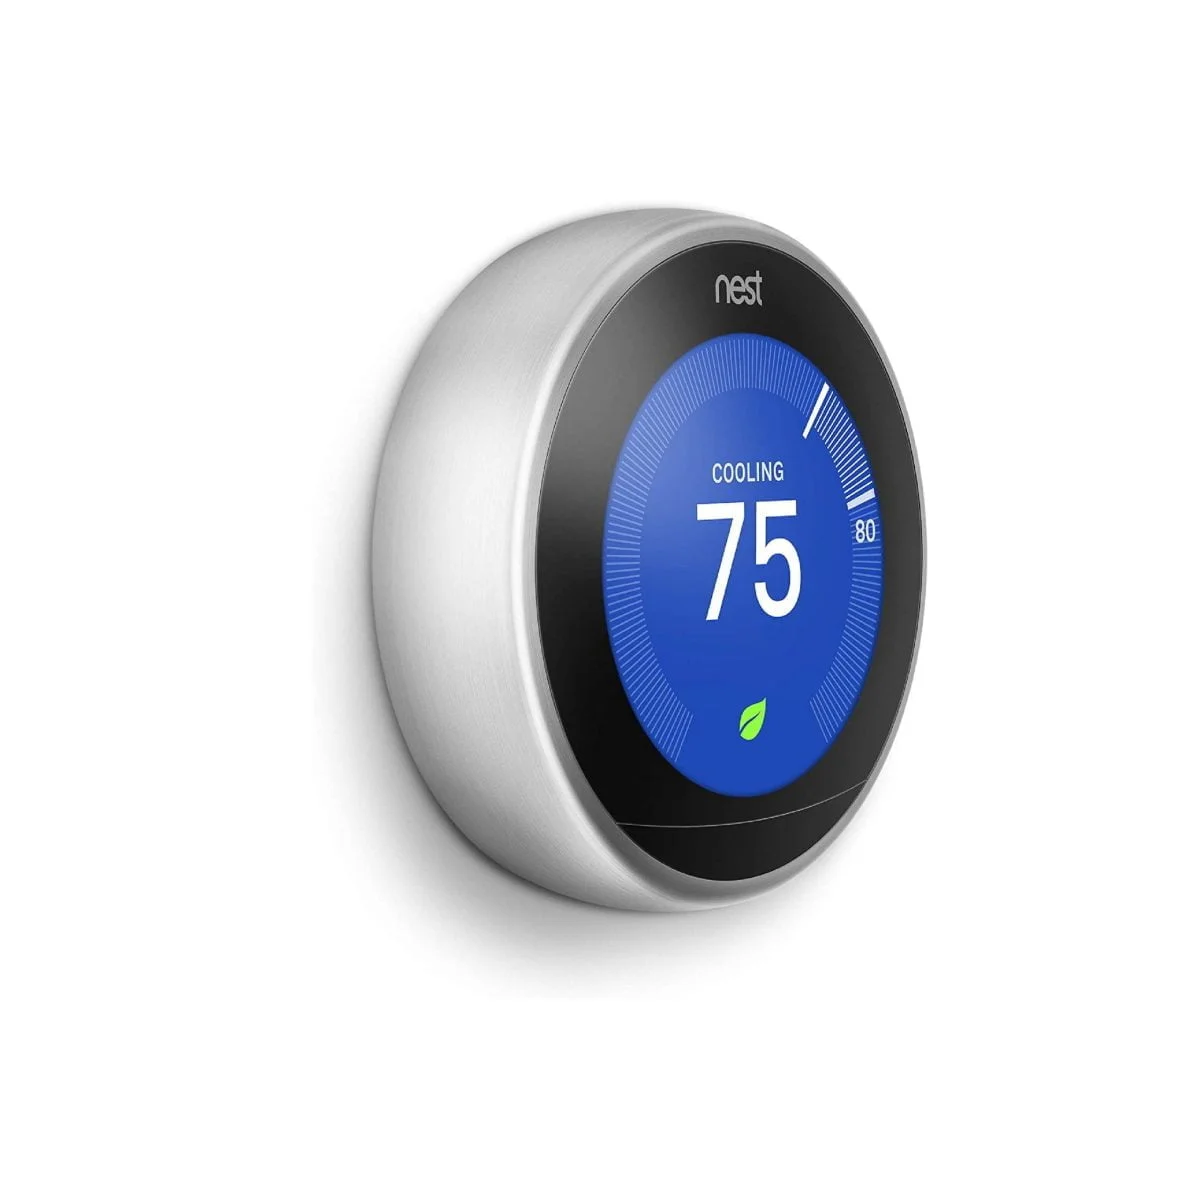 Eqweww 02 Scaled Google &Lt;H1&Gt;Google Nest Learning Smart Wifi Thermostat 3Rd Gen - T3007Es Stainless Steel&Lt;/H1&Gt; &Lt;Ul Class=&Quot;A-Unordered-List A-Vertical A-Spacing-Mini&Quot;&Gt; &Lt;Li&Gt;&Lt;Span Class=&Quot;A-List-Item&Quot;&Gt;Auto-Schedule: No More Confusing Programming. It Learns The Temperatures You Like And Programs Itself.&Lt;/Span&Gt;&Lt;/Li&Gt; &Lt;Li&Gt;&Lt;Span Class=&Quot;A-List-Item&Quot;&Gt;Wi-Fi Thermostat: Connect The Nest Thermostat To Wi-Fi To Change The Temperature From Your Phone, Tablet Or Laptop.&Lt;/Span&Gt;&Lt;/Li&Gt; &Lt;Li&Gt;&Lt;Span Class=&Quot;A-List-Item&Quot;&Gt;Energy Saving: You’ll See The Nest Leaf When You Choose A Temperature That Saves Energy. It Guides You In The Right Direction.&Lt;/Span&Gt;&Lt;/Li&Gt; &Lt;Li&Gt;&Lt;Span Class=&Quot;A-List-Item&Quot;&Gt;Smart Thermostat: Early-On Nest Learns How Your Home Warms Up And Keeps An Eye On The Weather To Get You The Temperature You Want When You Want It.&Lt;/Span&Gt;&Lt;/Li&Gt; &Lt;Li&Gt;&Lt;Span Class=&Quot;A-List-Item&Quot;&Gt;Home/Away Assist: The Nest Thermostat Automatically Turns Itself Down When You’re Away To Avoid Heating Or Cooling An Empty Home.&Lt;/Span&Gt;&Lt;/Li&Gt; &Lt;Li&Gt;&Lt;Span Class=&Quot;A-List-Item&Quot;&Gt;Works With Amazon Alexa For Voice Control (Alexa Device Sold Separately)&Lt;/Span&Gt;&Lt;/Li&Gt; &Lt;Li&Gt;&Lt;Span Class=&Quot;A-List-Item&Quot;&Gt;Auto-Schedule: Nest Learns The Temperatures You Like And Programs Itself In About A Week.&Lt;/Span&Gt; &Lt;H5&Gt;Note : Direct Replacement Warranty One Year&Lt;/H5&Gt; &Lt;Div Class=&Quot;Html-Fragment&Quot;&Gt; &Lt;Div&Gt; &Lt;B&Gt;We Also Provide International Wholesale And Retail Shipping To All Gcc Countries: Saudi Arabia, Qatar, Oman, Kuwait, Bahrain.&Lt;/B&Gt; &Lt;/Div&Gt; &Lt;/Div&Gt;&Lt;/Li&Gt; &Lt;/Ul&Gt; &Lt;Div Class=&Quot;A-Row A-Expander-Container A-Expander-Inline-Container&Quot; Aria-Live=&Quot;Polite&Quot;&Gt; &Lt;Div Class=&Quot;A-Expander-Content A-Expander-Extend-Content A-Expander-Content-Expanded&Quot; Aria-Expanded=&Quot;True&Quot;&Gt;&Lt;/Div&Gt; &Nbsp; &Lt;/Div&Gt; Thermostat Google Nest Learning Smart Wifi Thermostat 3Rd Gen - T3007Es Stainless Steel